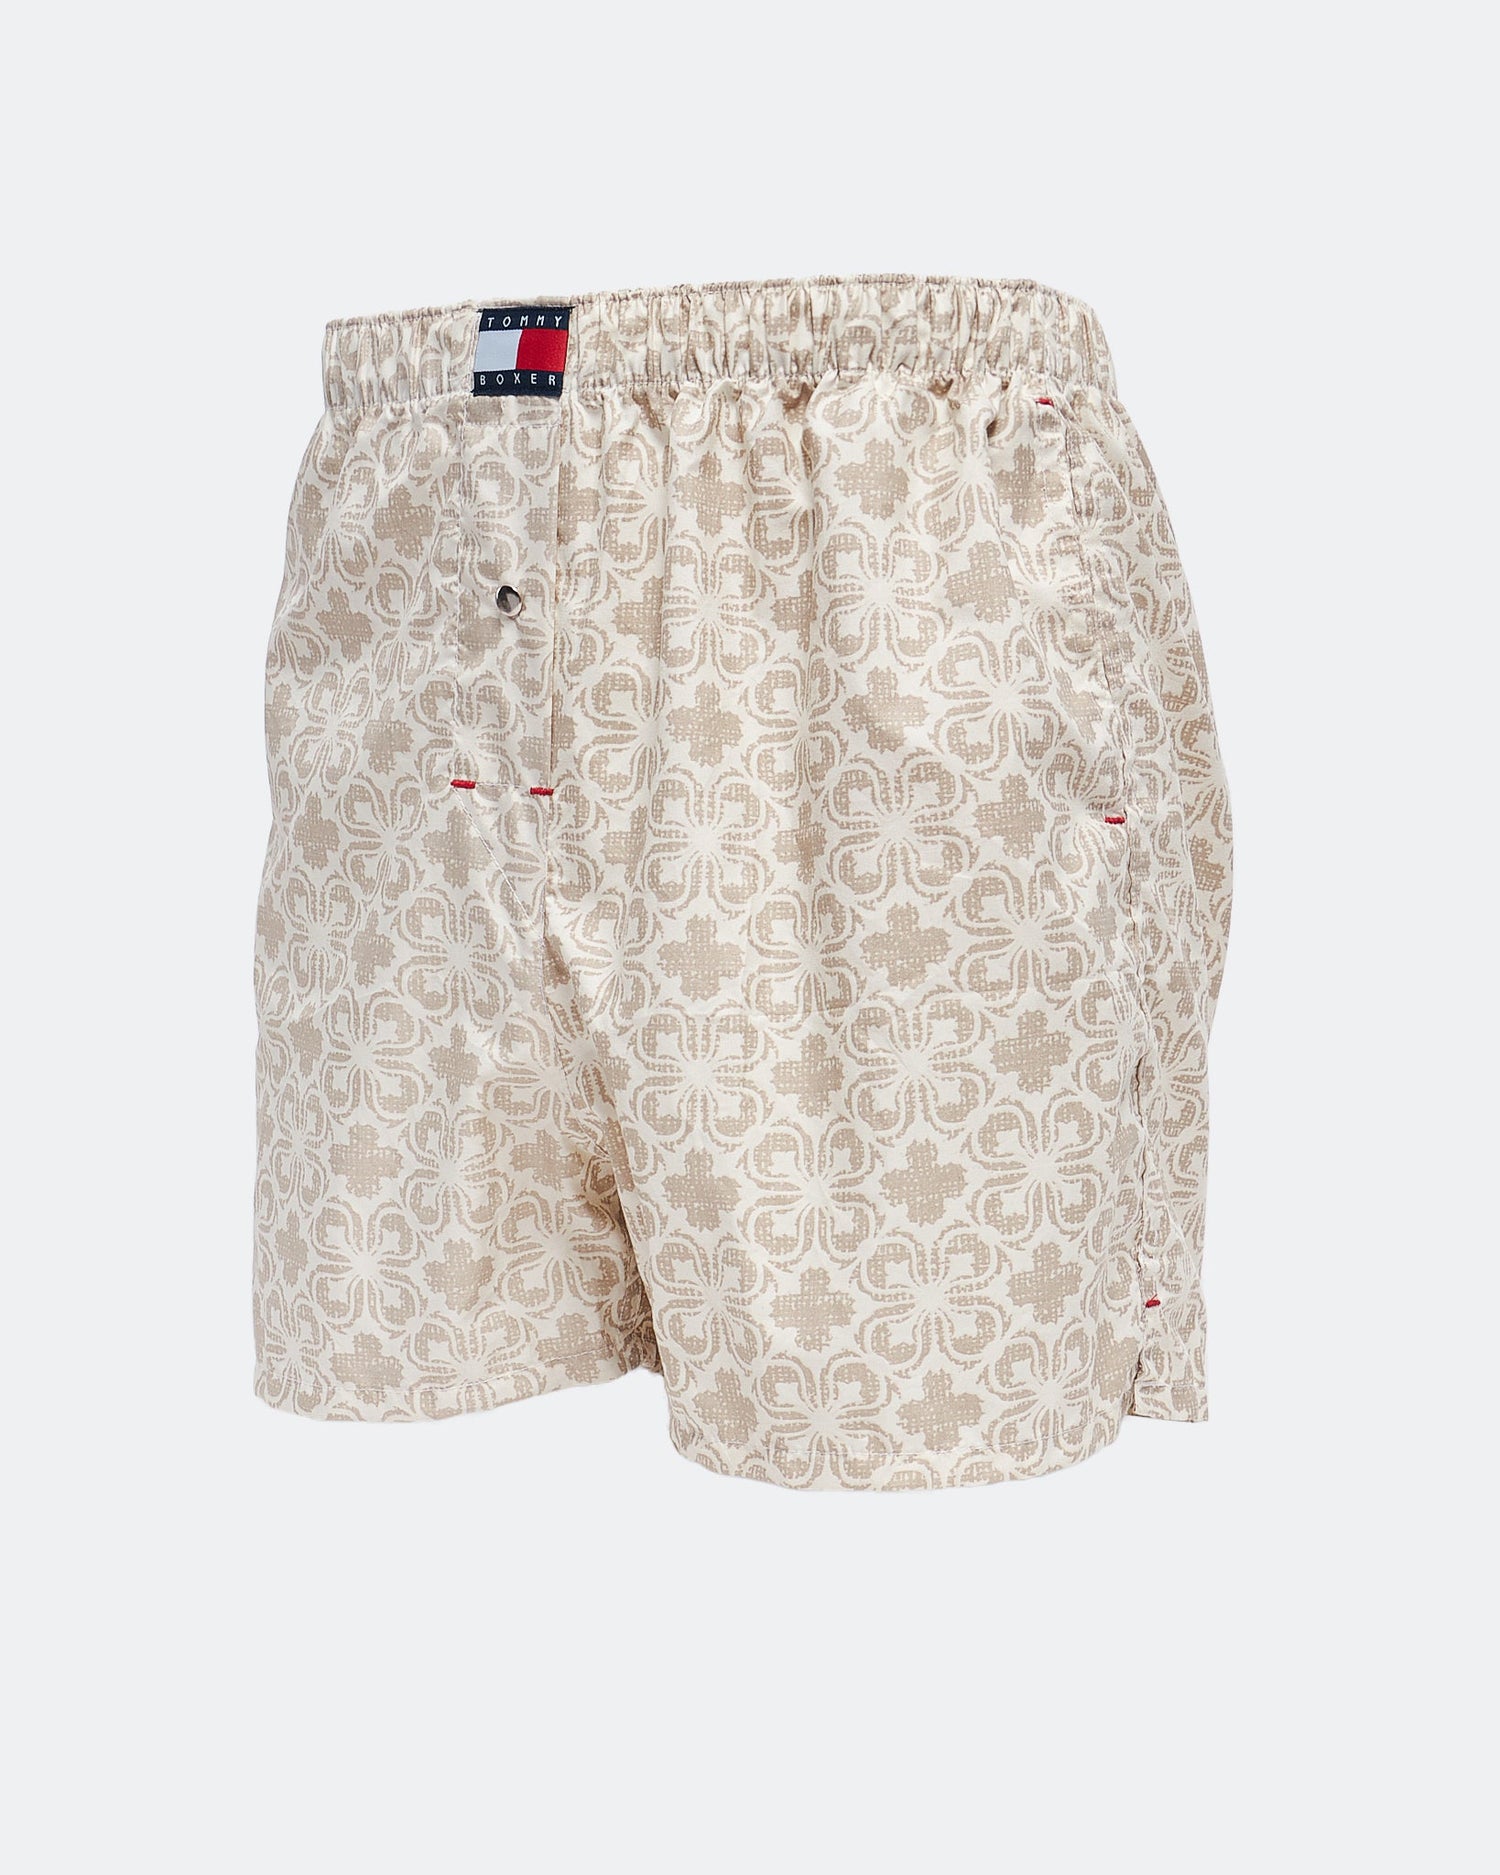 MOI OUTFIT-Floral Over Printed Men Boxer 6.90